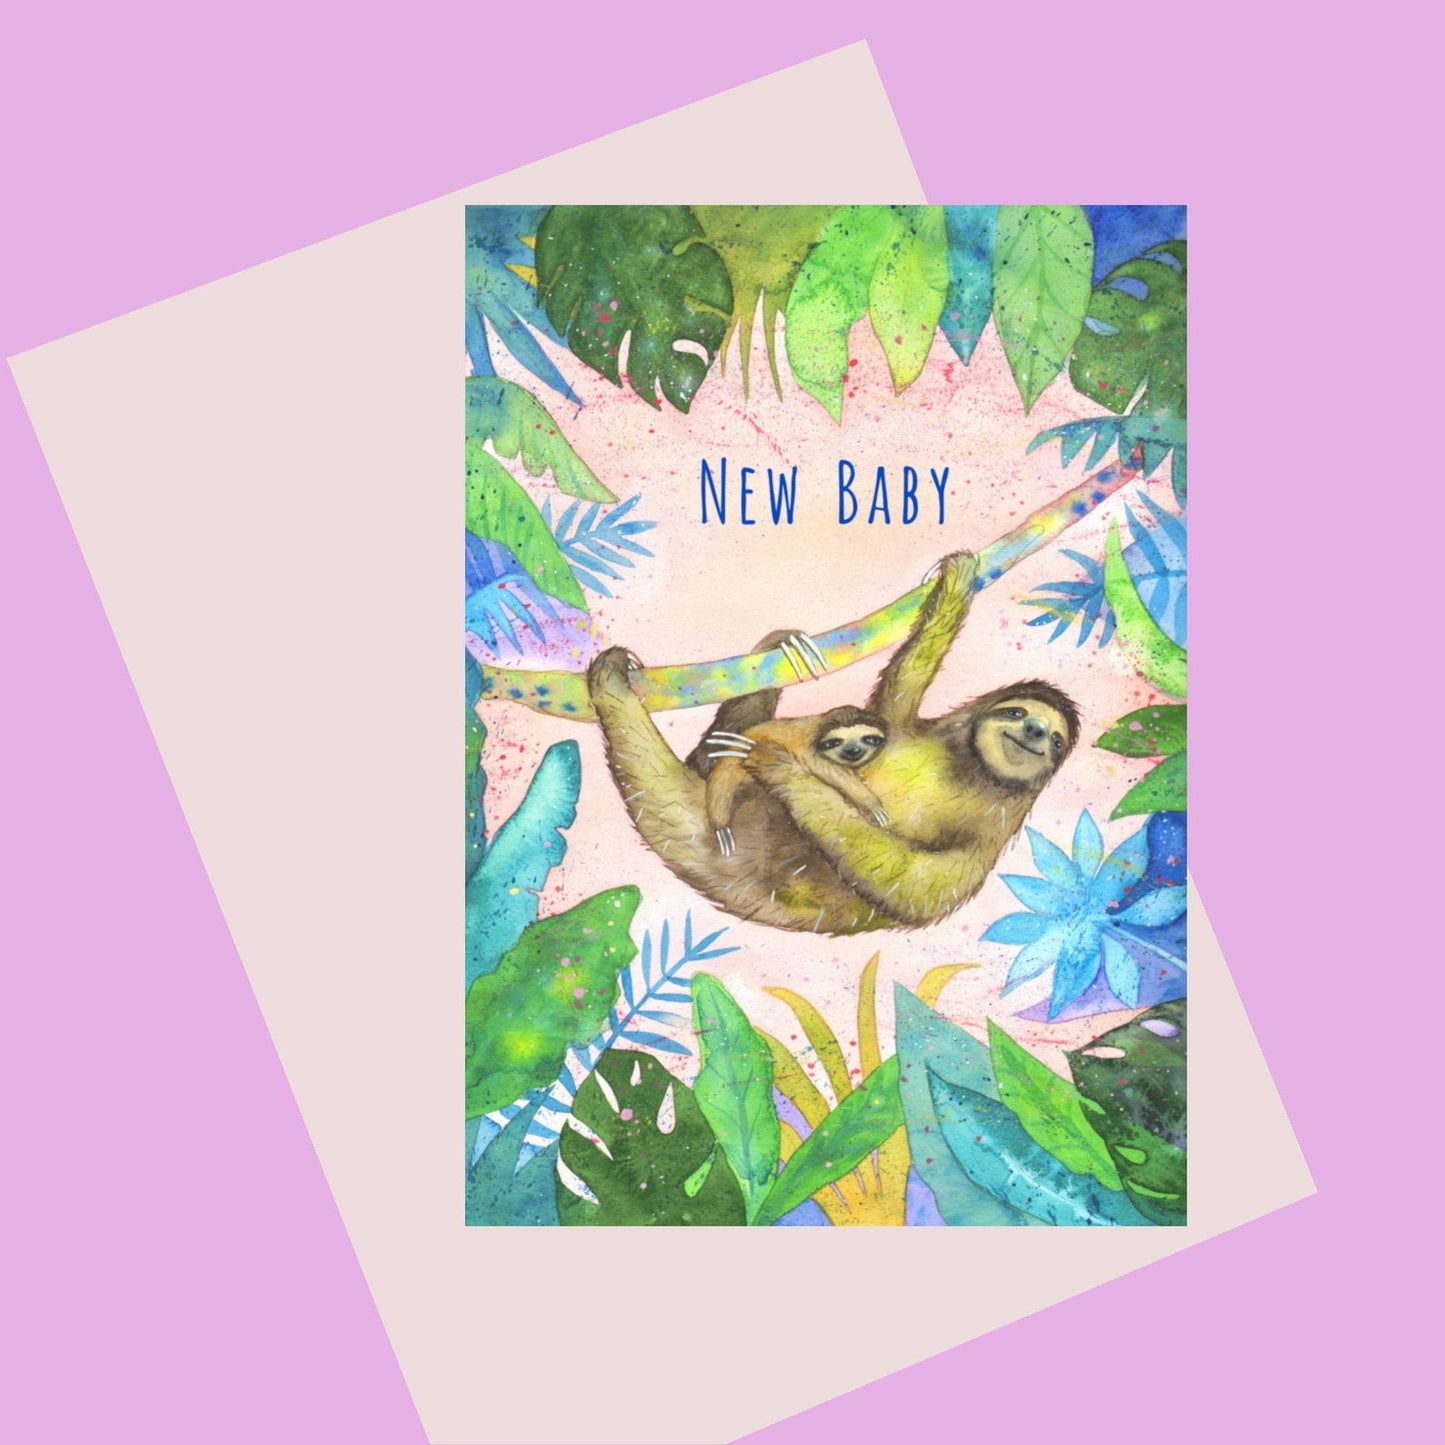 New Baby Card. A lovely illustration of a mother and baby sloth, Text on card reads New Baby.  Original painting by Laura Robertson a Bristol artists.